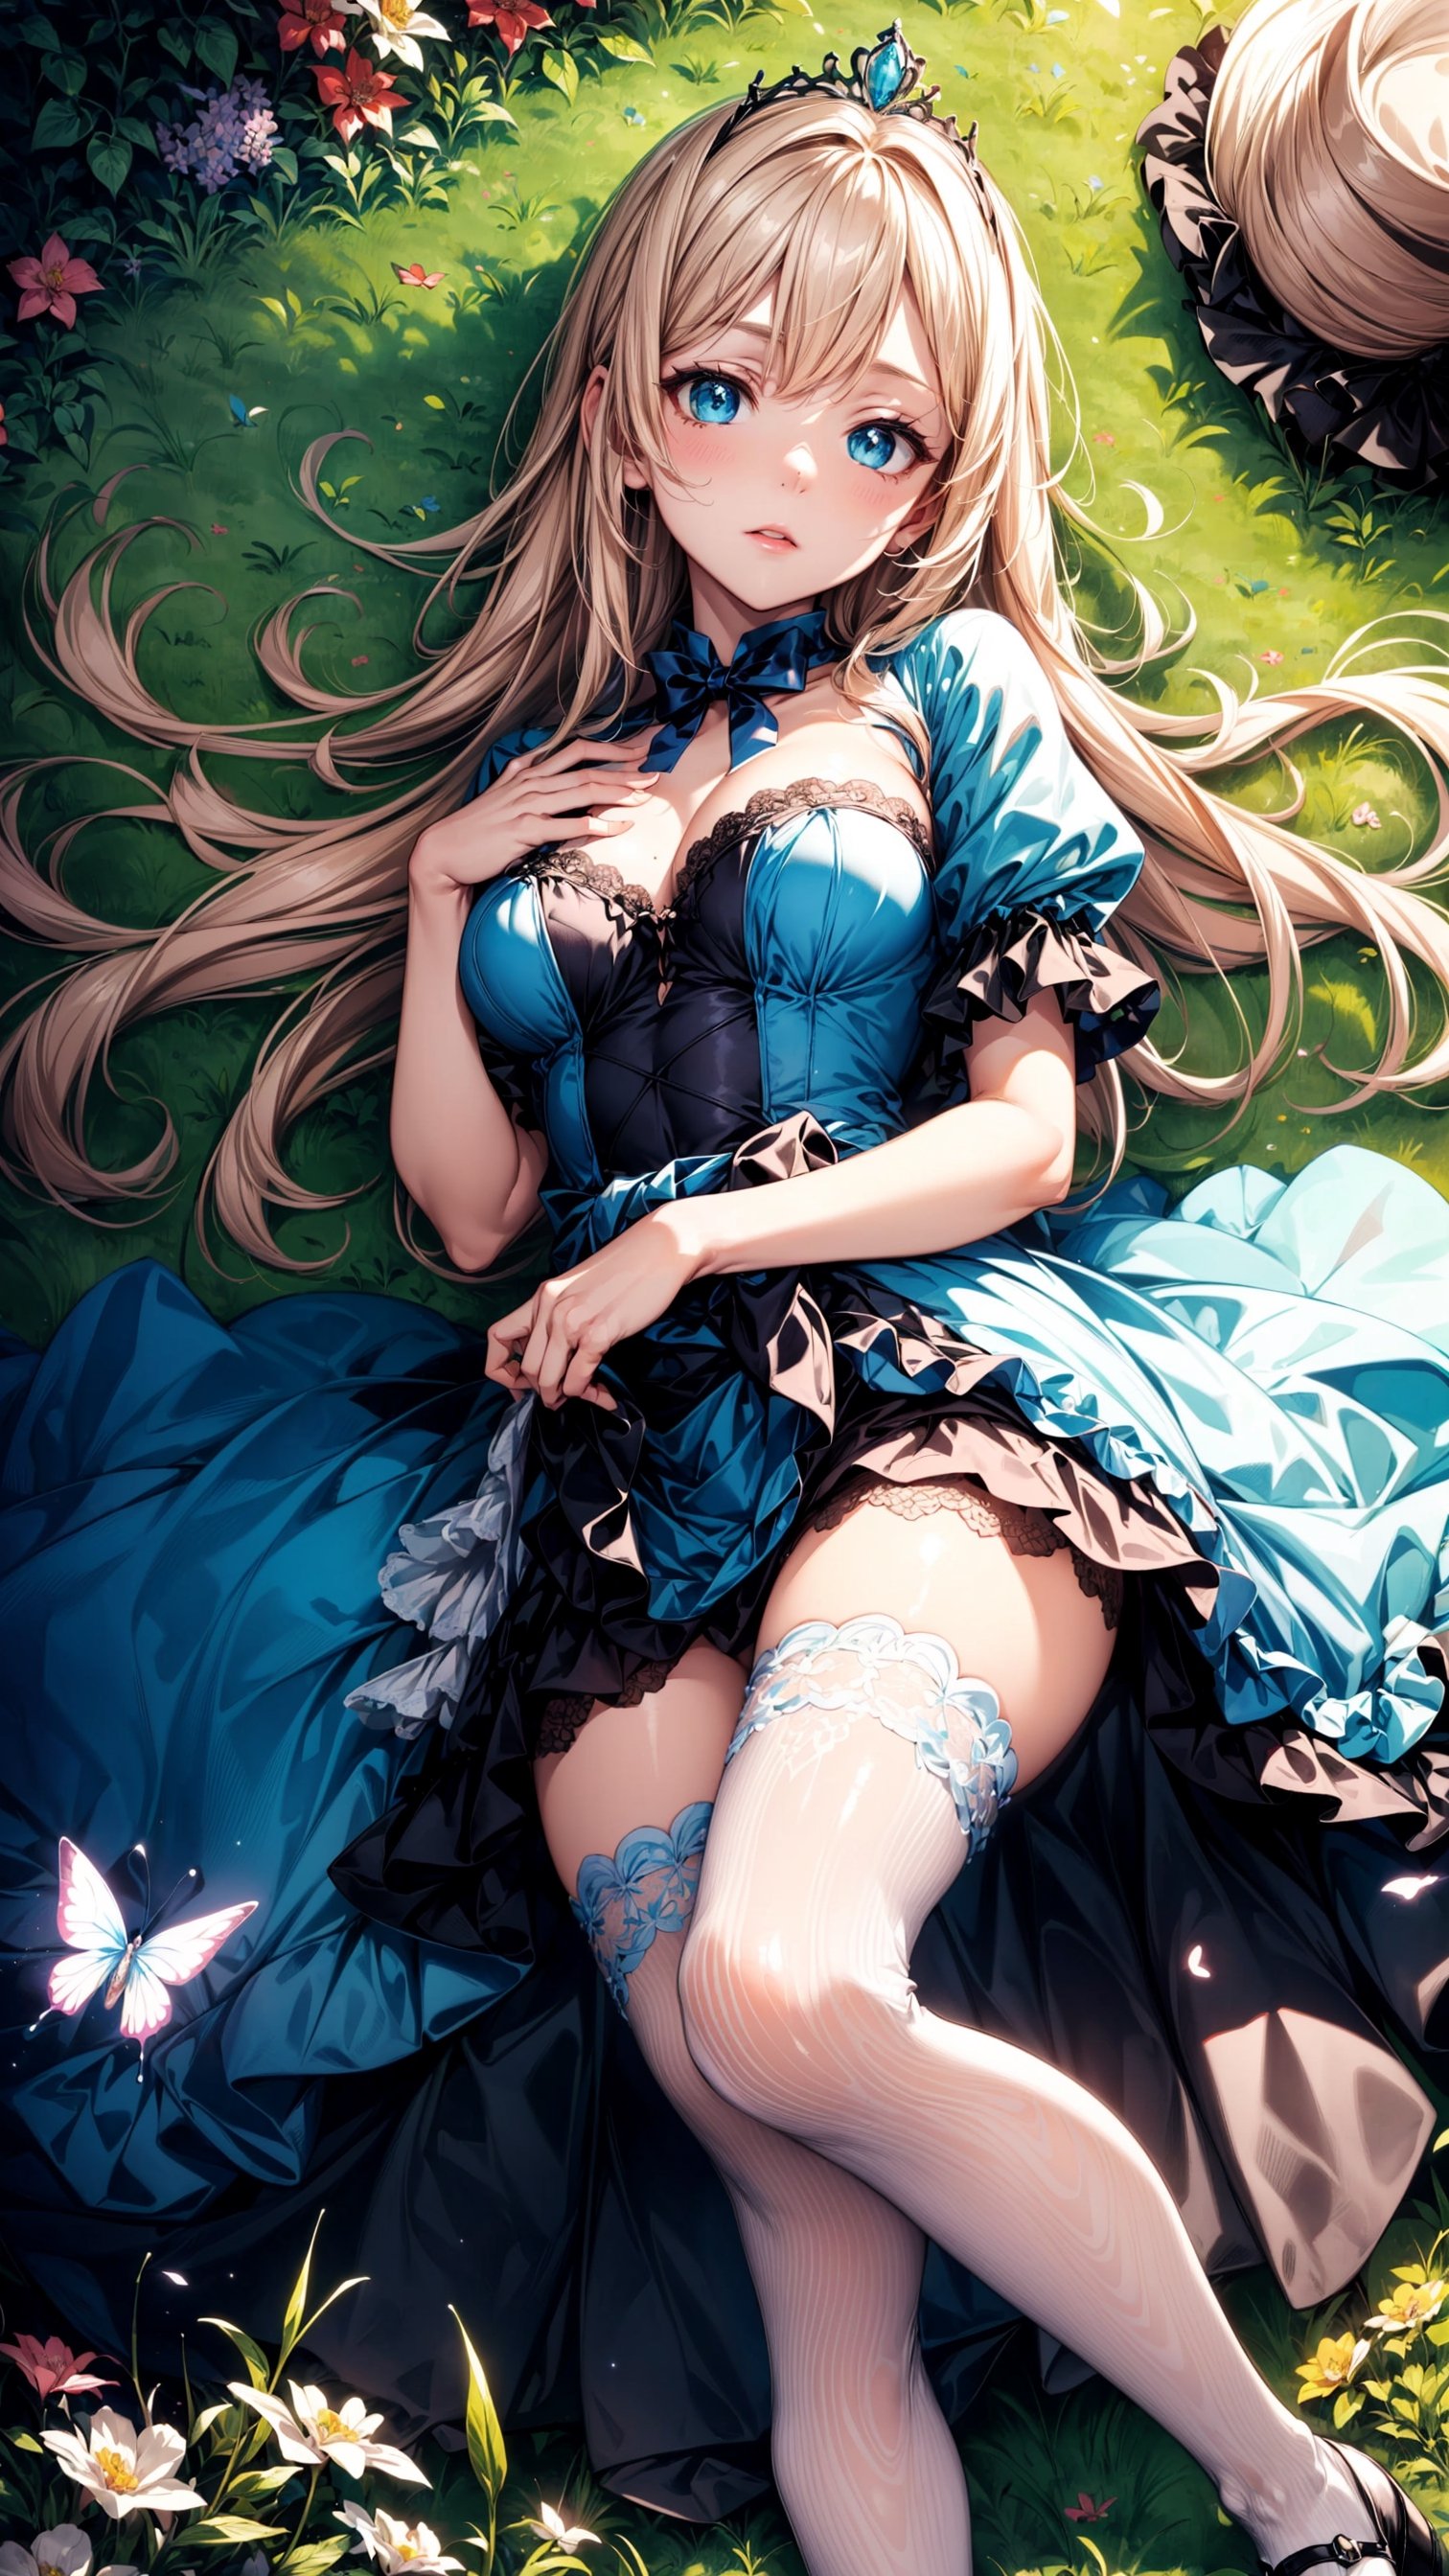 (best quality, masterpiece, illustration, designer, lighting), (extremely detailed CG 8k wallpaper unit), (detailed and expressive eyes), detailed particles, beautiful lighting, a cute girl, long blonde hair, wearing a teddy bear tiara, donning a beautiful blue and white dress with ruffles and lace, sheer pink stockings, transparent aquamarine crystal shoes, bows around her waist (Alice in Wonderland), butterflies around, (Pixiv anime style),(manga style),background, garden, colored flowers,butterflies, flowers, flowers covering her, (aerial view), grass, leaning on flowers, lying down,  looking to viewer, flower background,road of flowers,drow